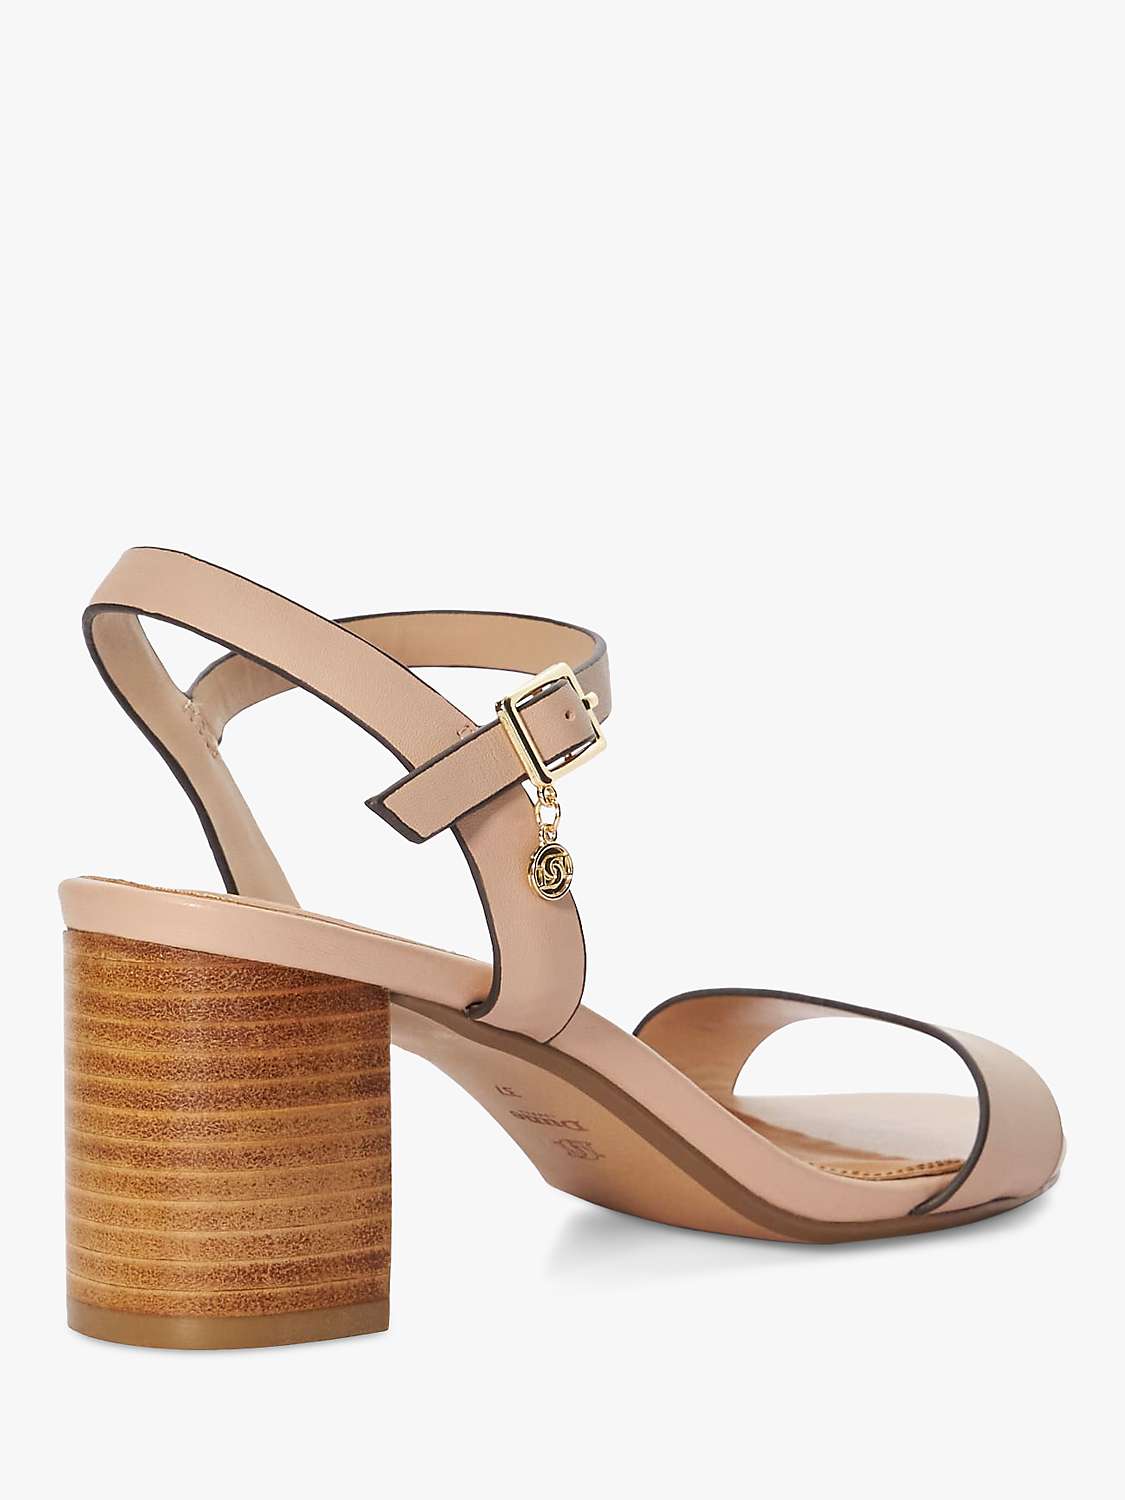 Buy Dune Wide Fit Jelly Leather Block Heel Sandals, Blush Online at johnlewis.com